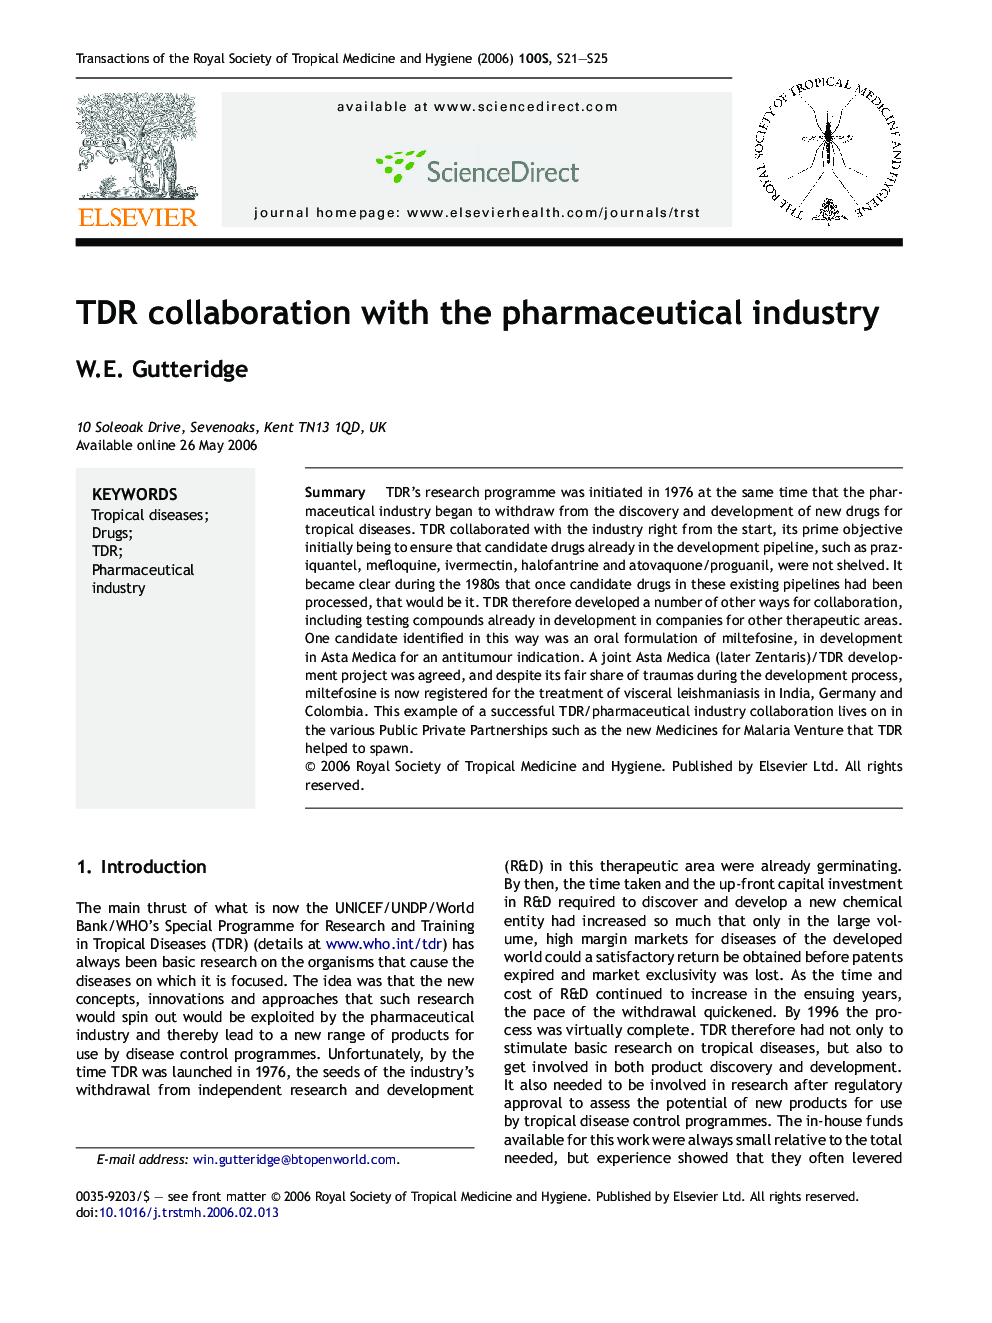 TDR collaboration with the pharmaceutical industry